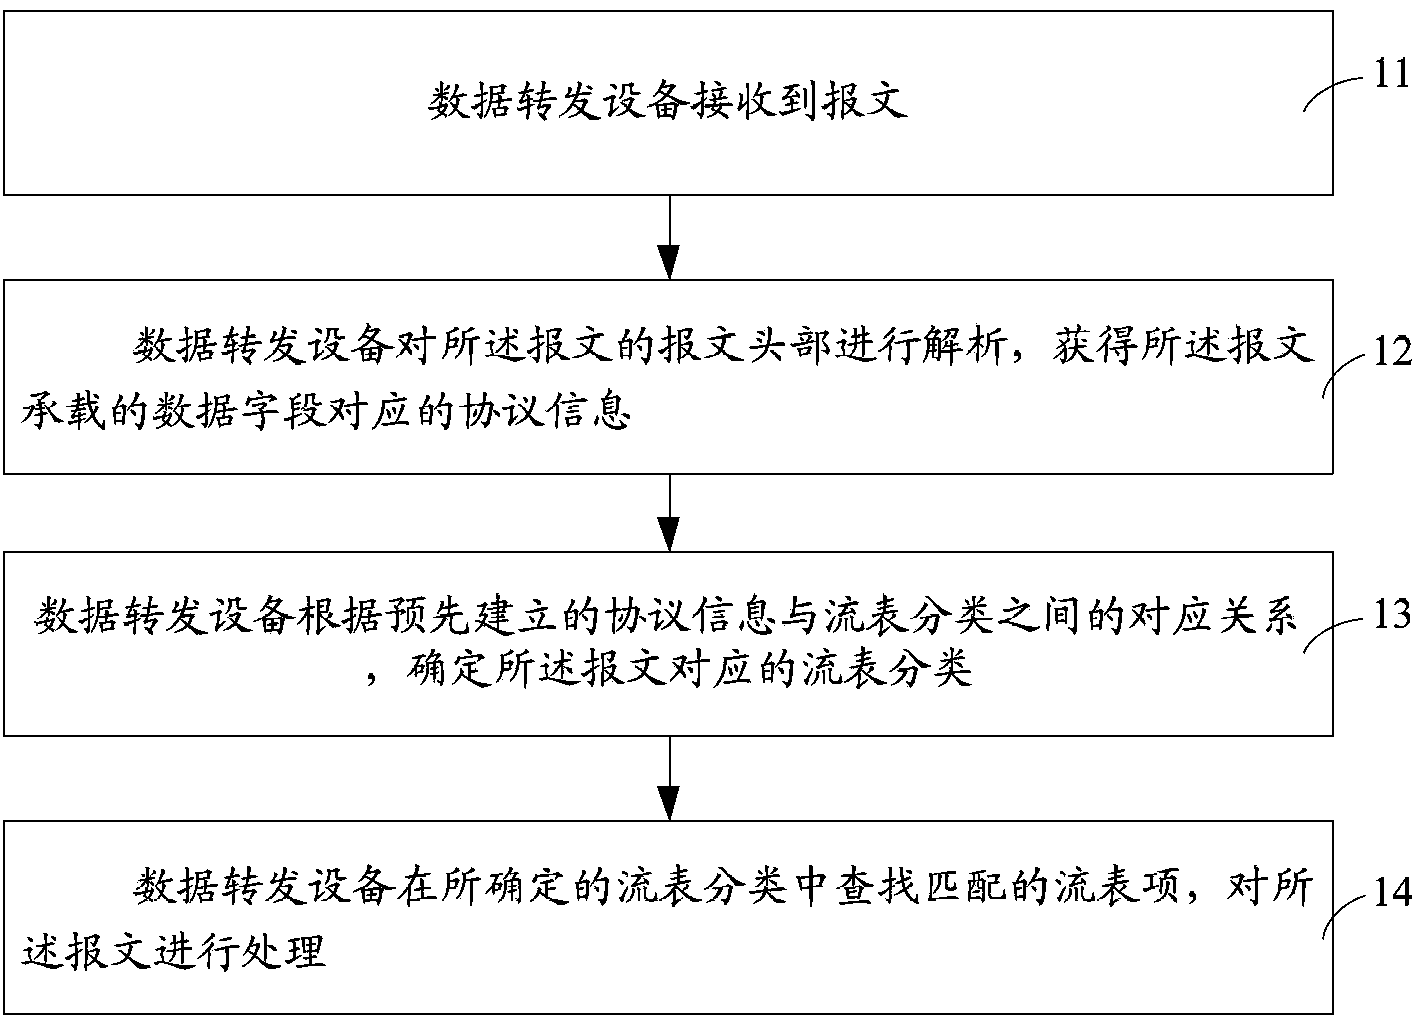 Message processing method and equipment